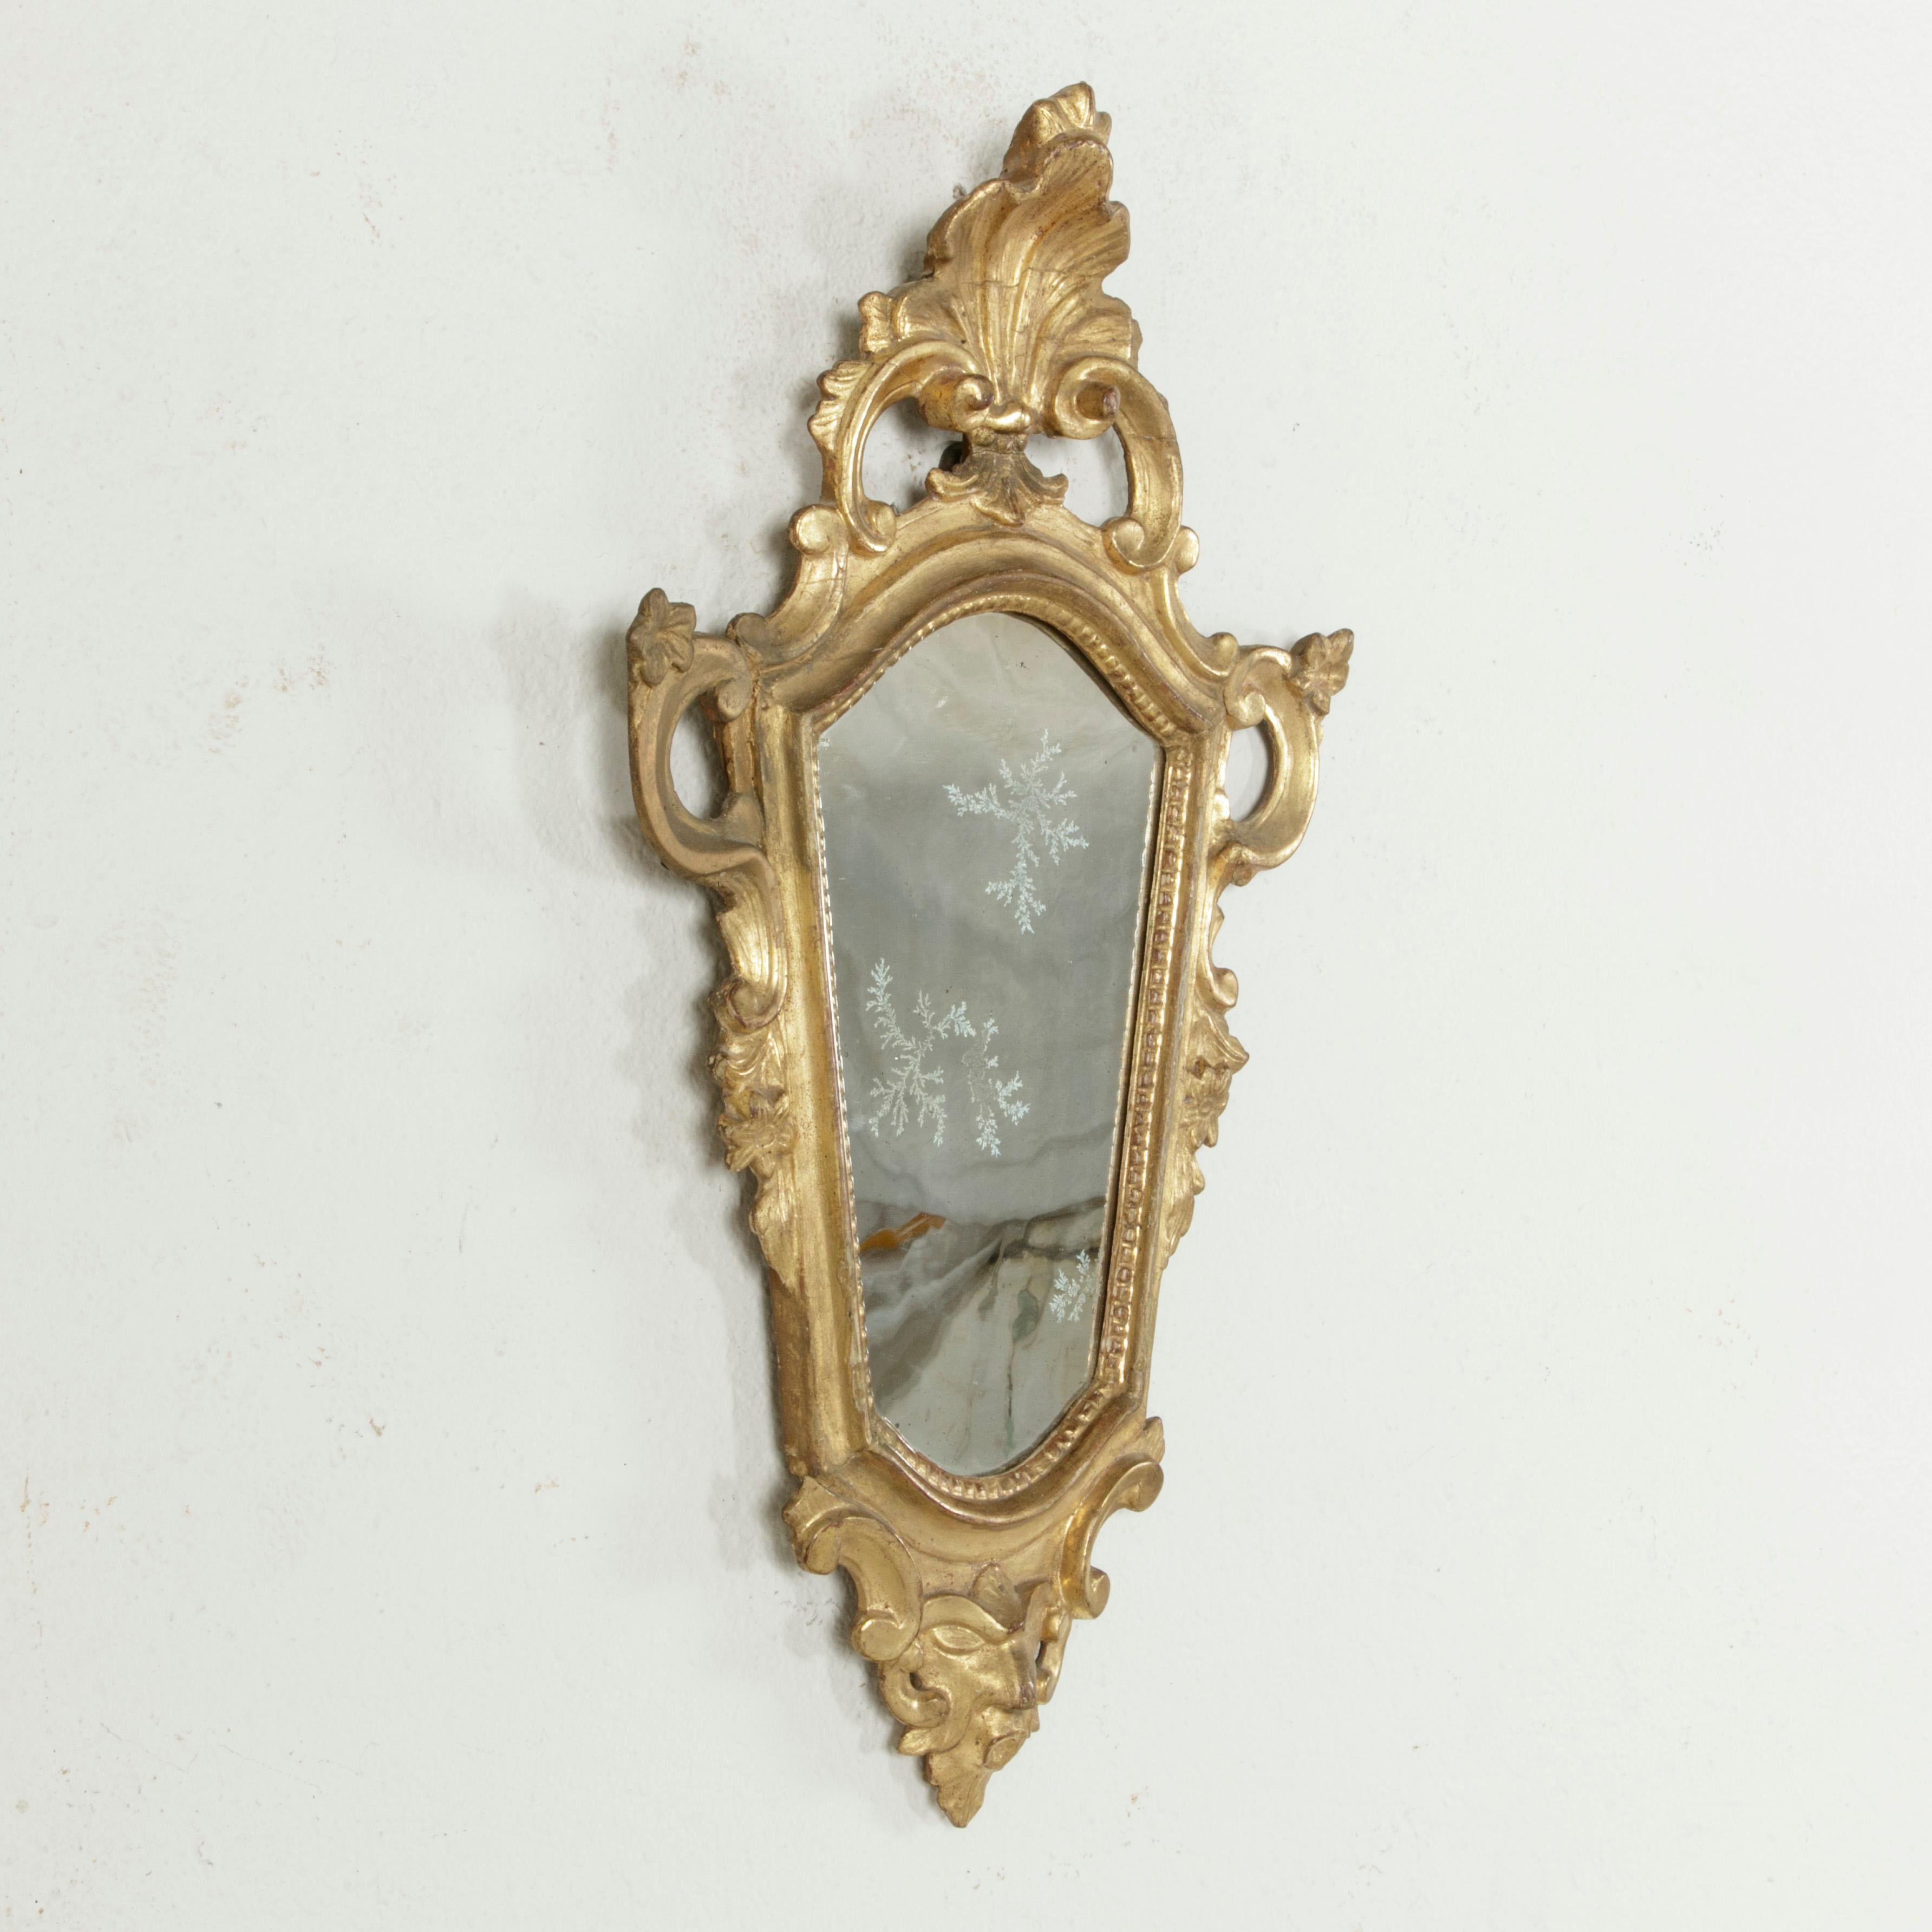 Early 18th Century French Regency Period Giltwood Mirror with Mercury Glass 1